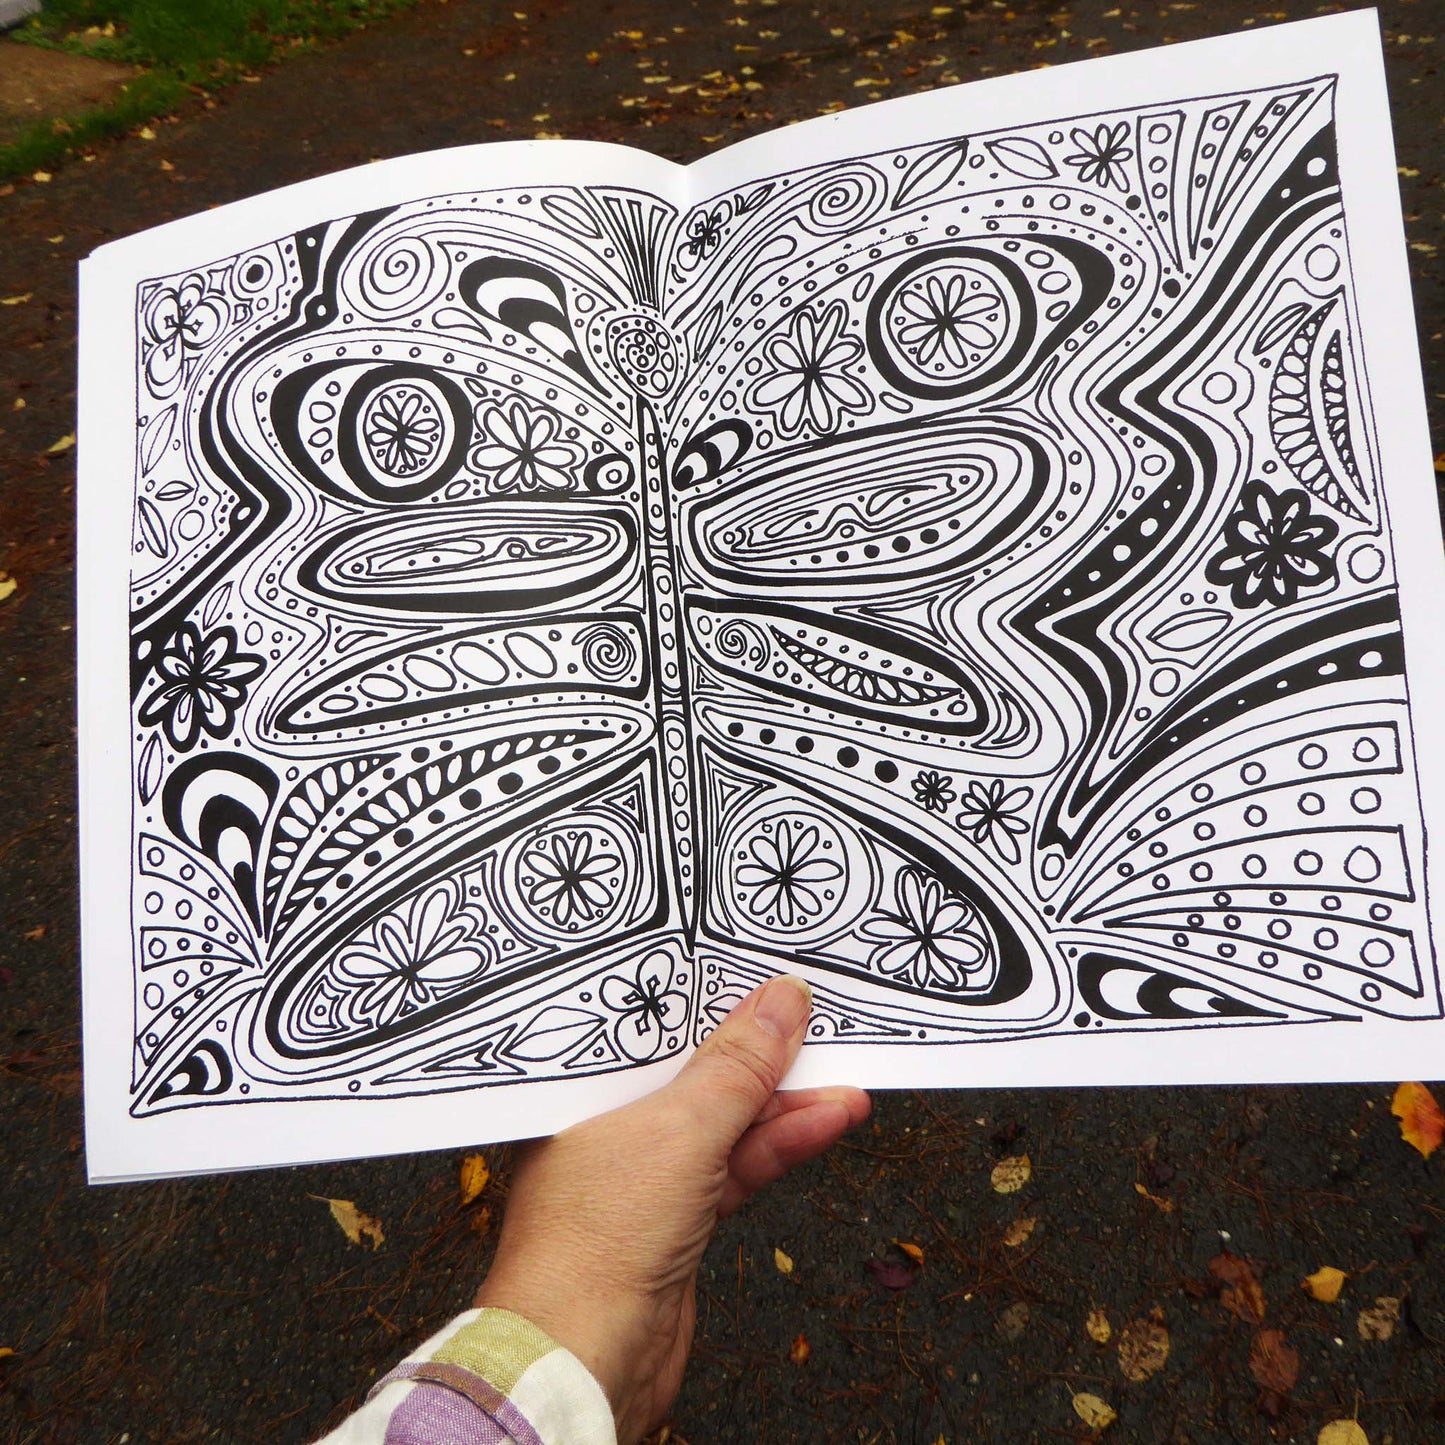 Colouring book - For adults and children - Volume 2 - by Norfolk based artist Debbie Osborn - Handmade